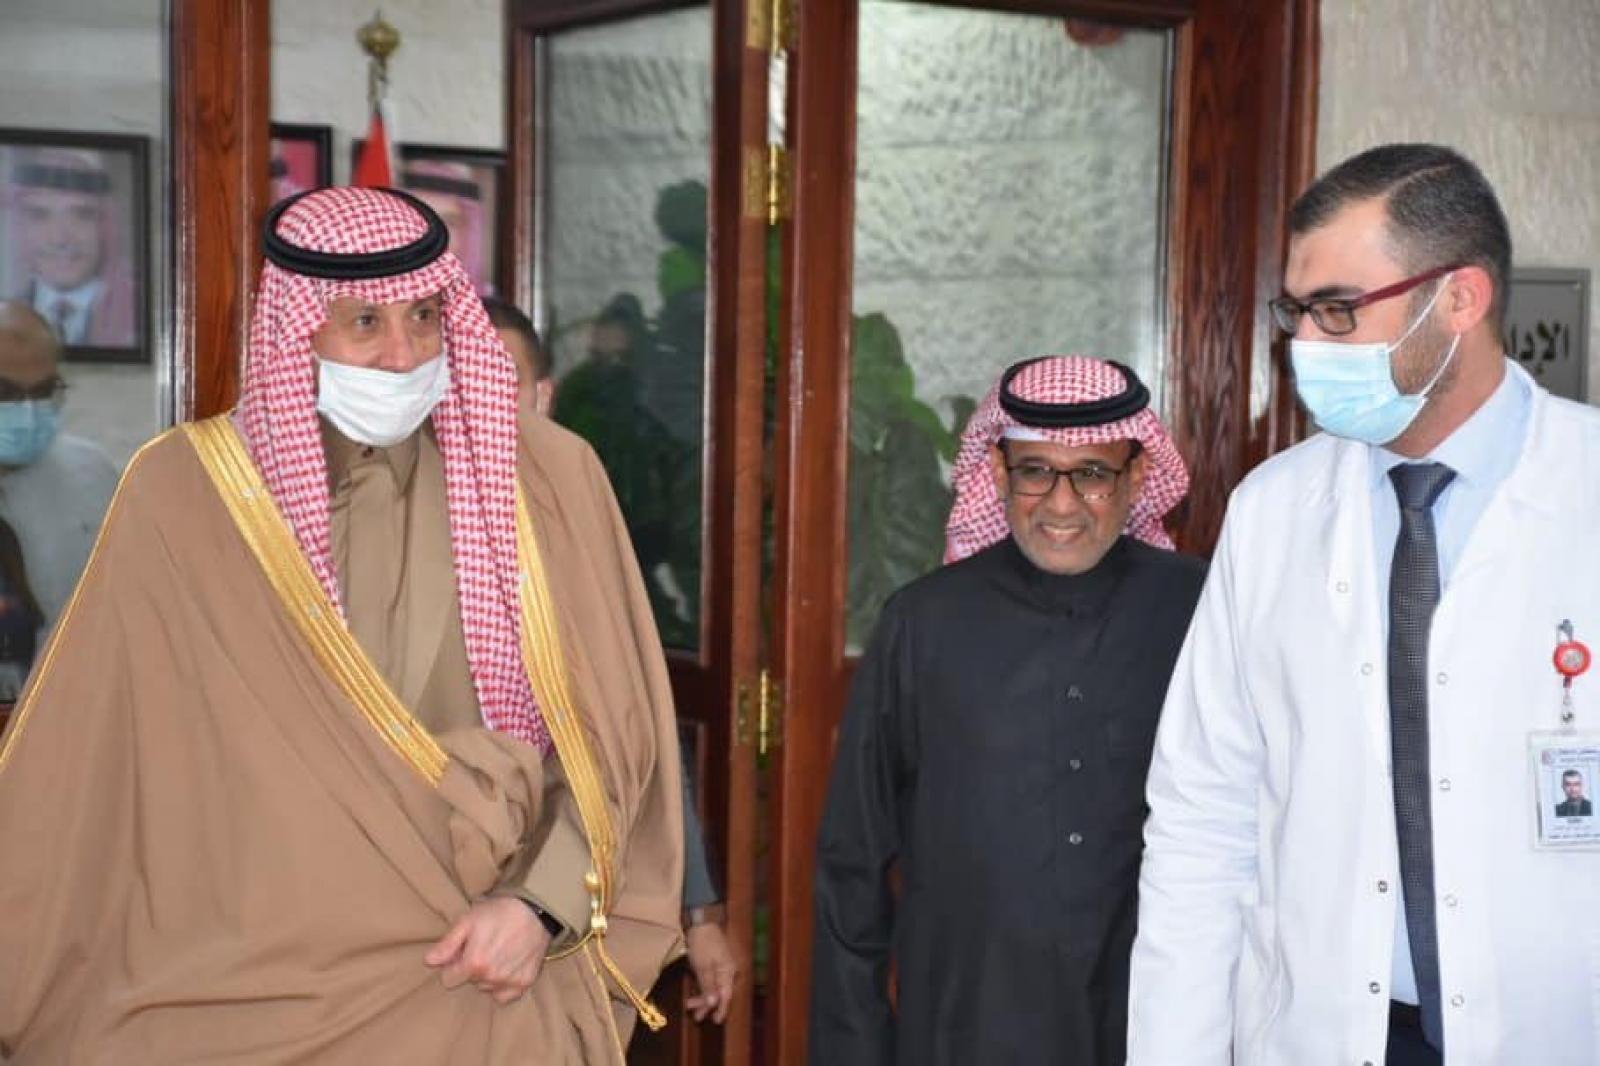 We were honored by a kind visit from His Excellency the Saudi Ambassador